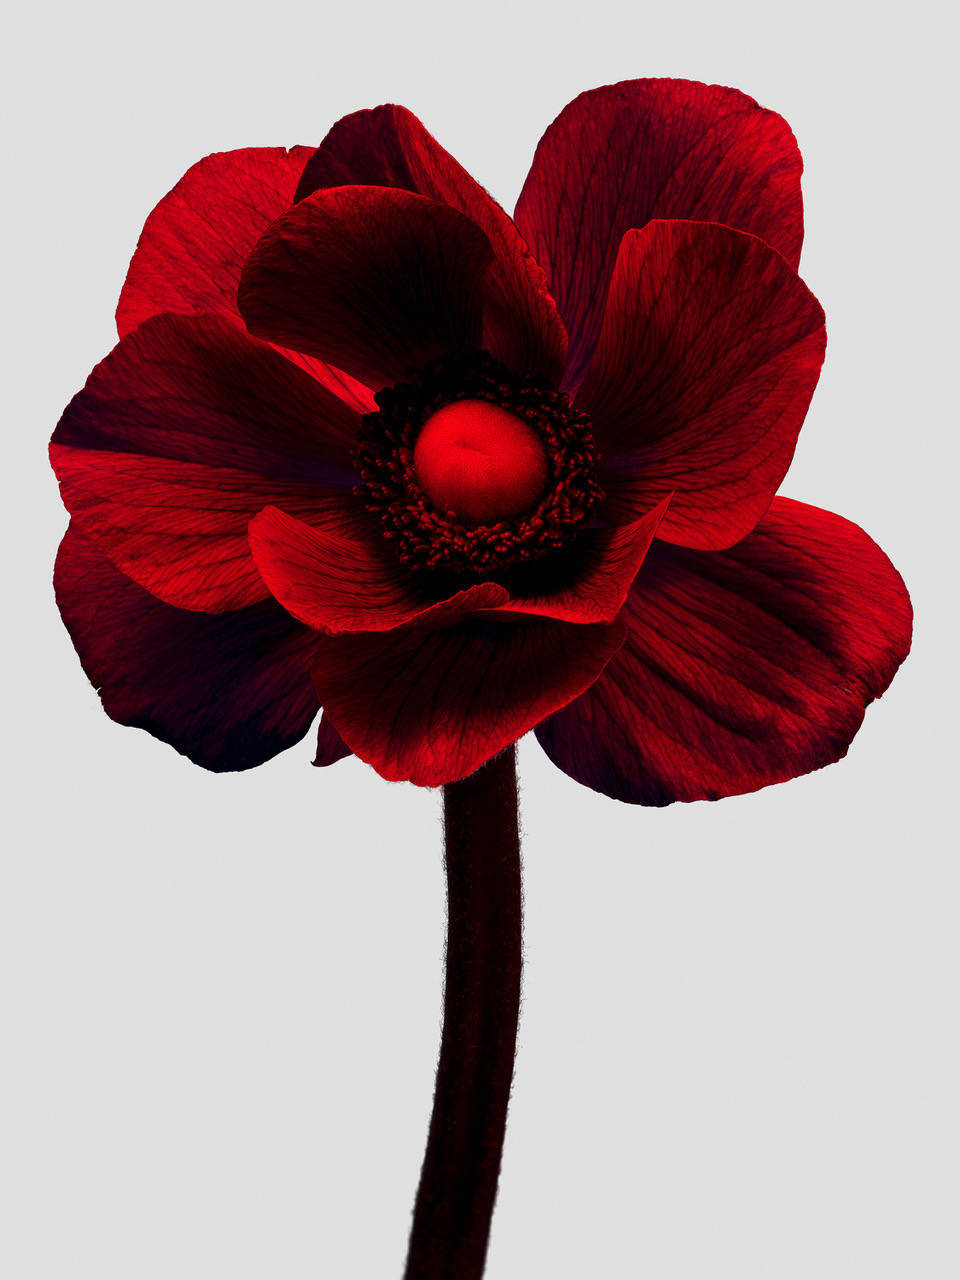 Rouge Anemone - Making Pictures